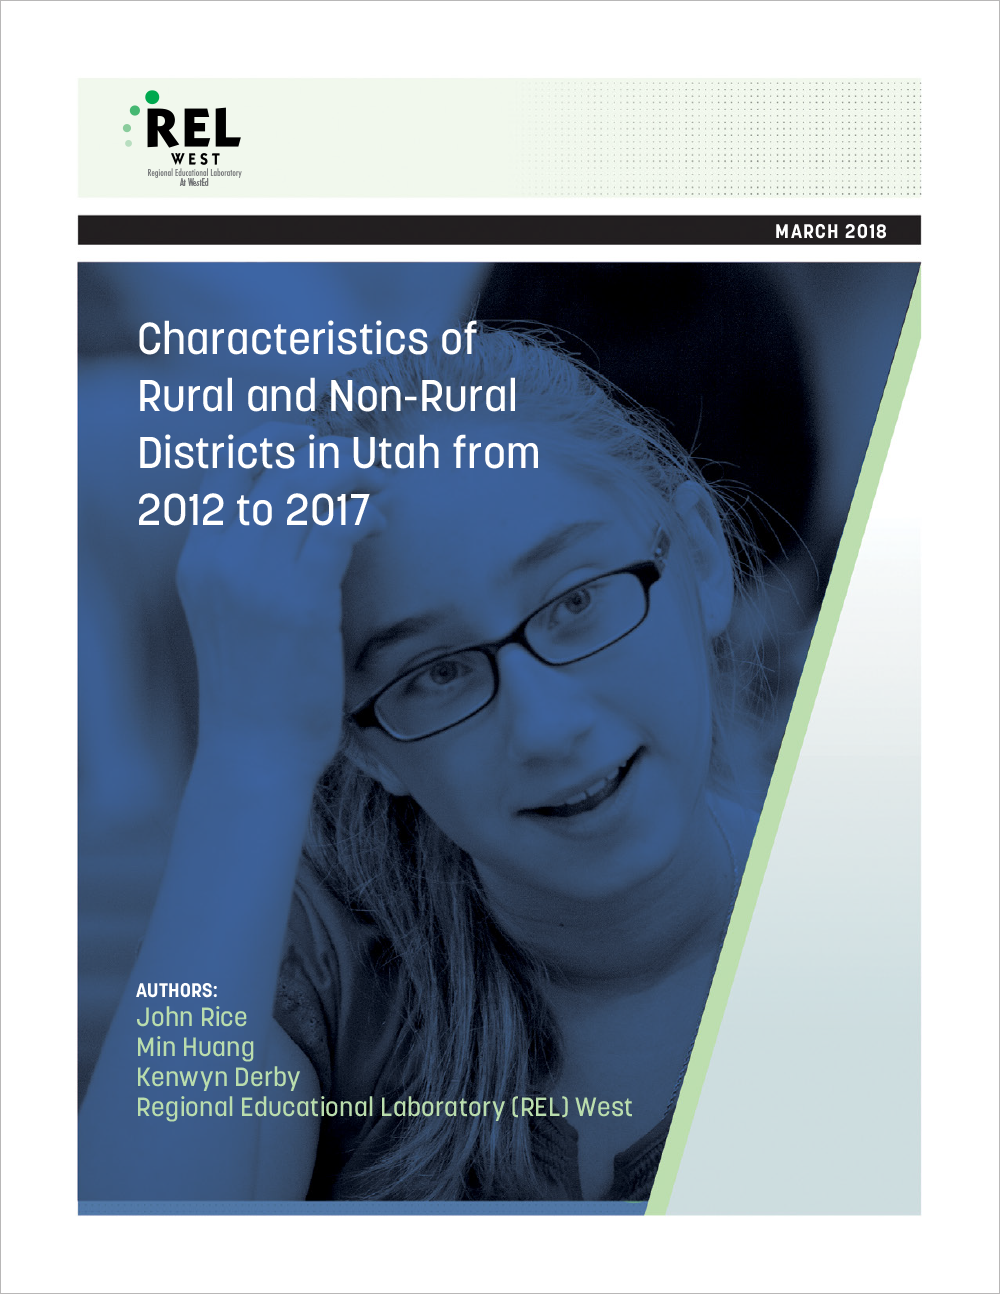 Characteristics of Rural and Non-Rural Districts in Utah from 2012 to 2017